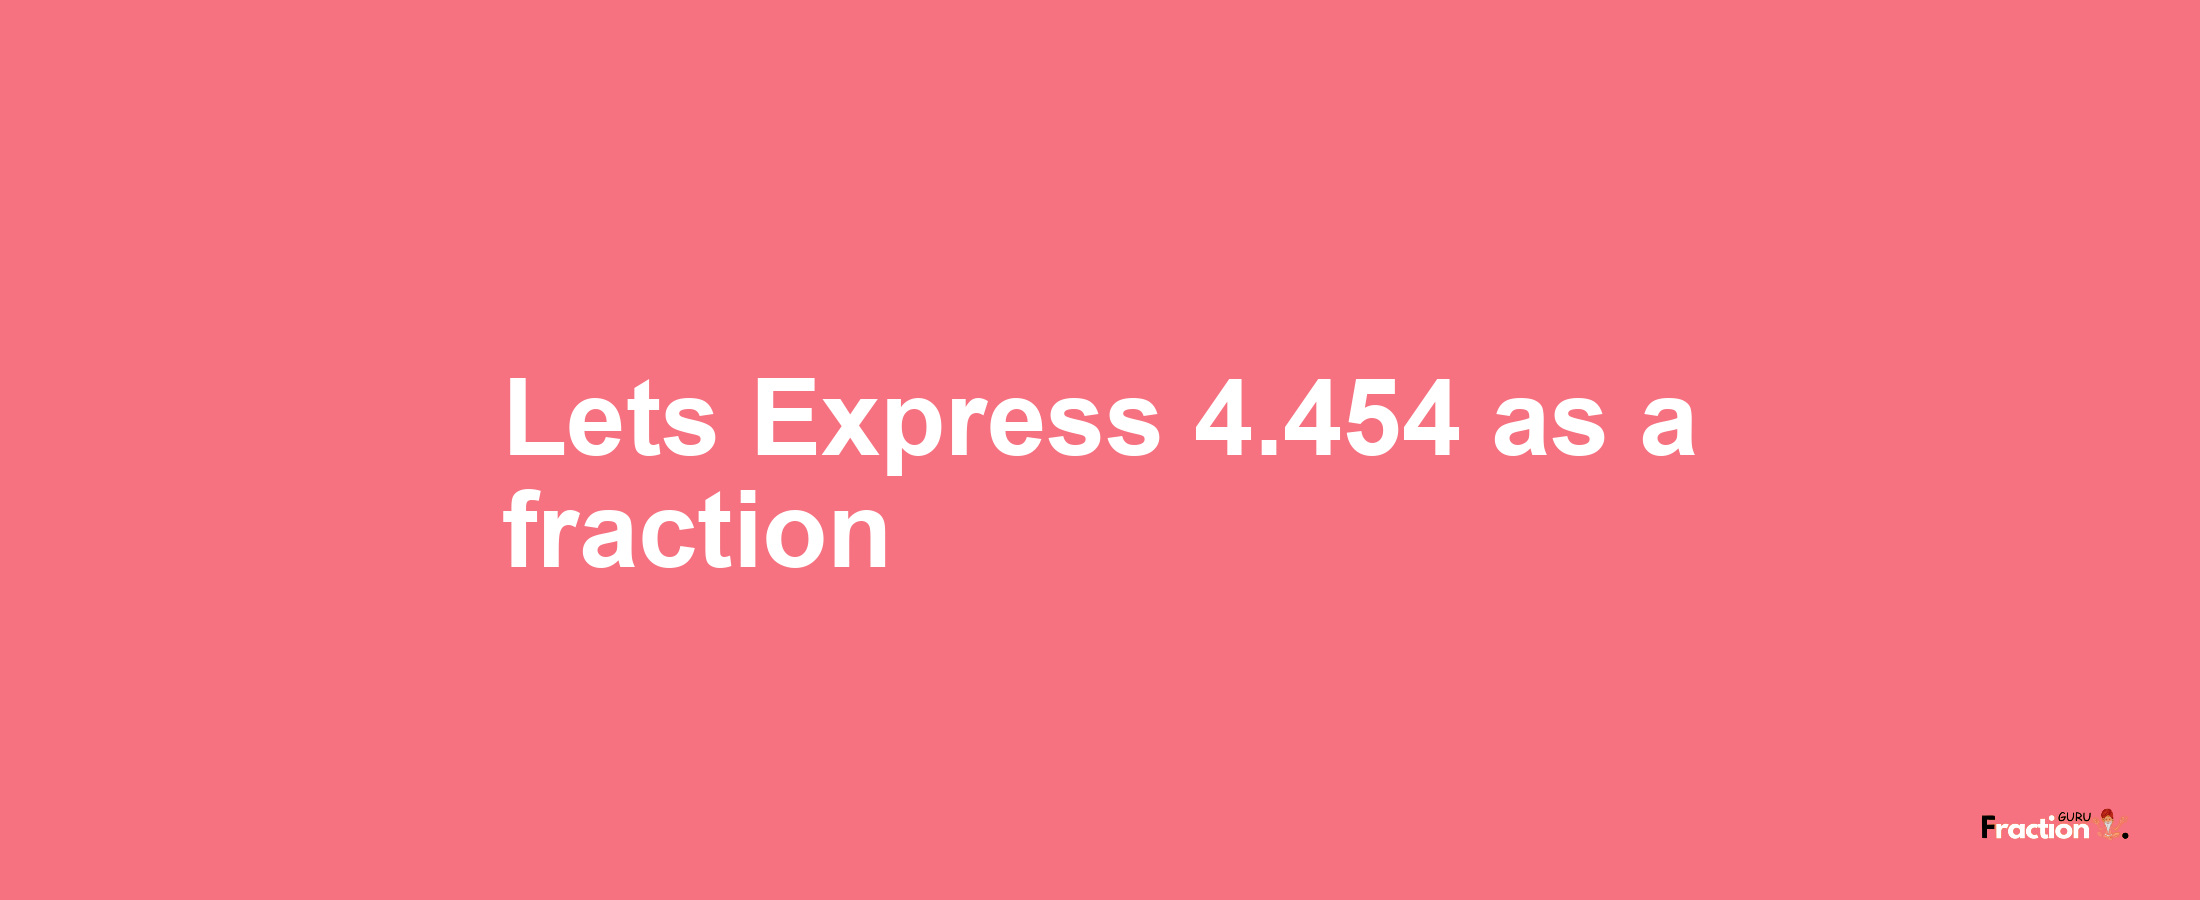 Lets Express 4.454 as afraction